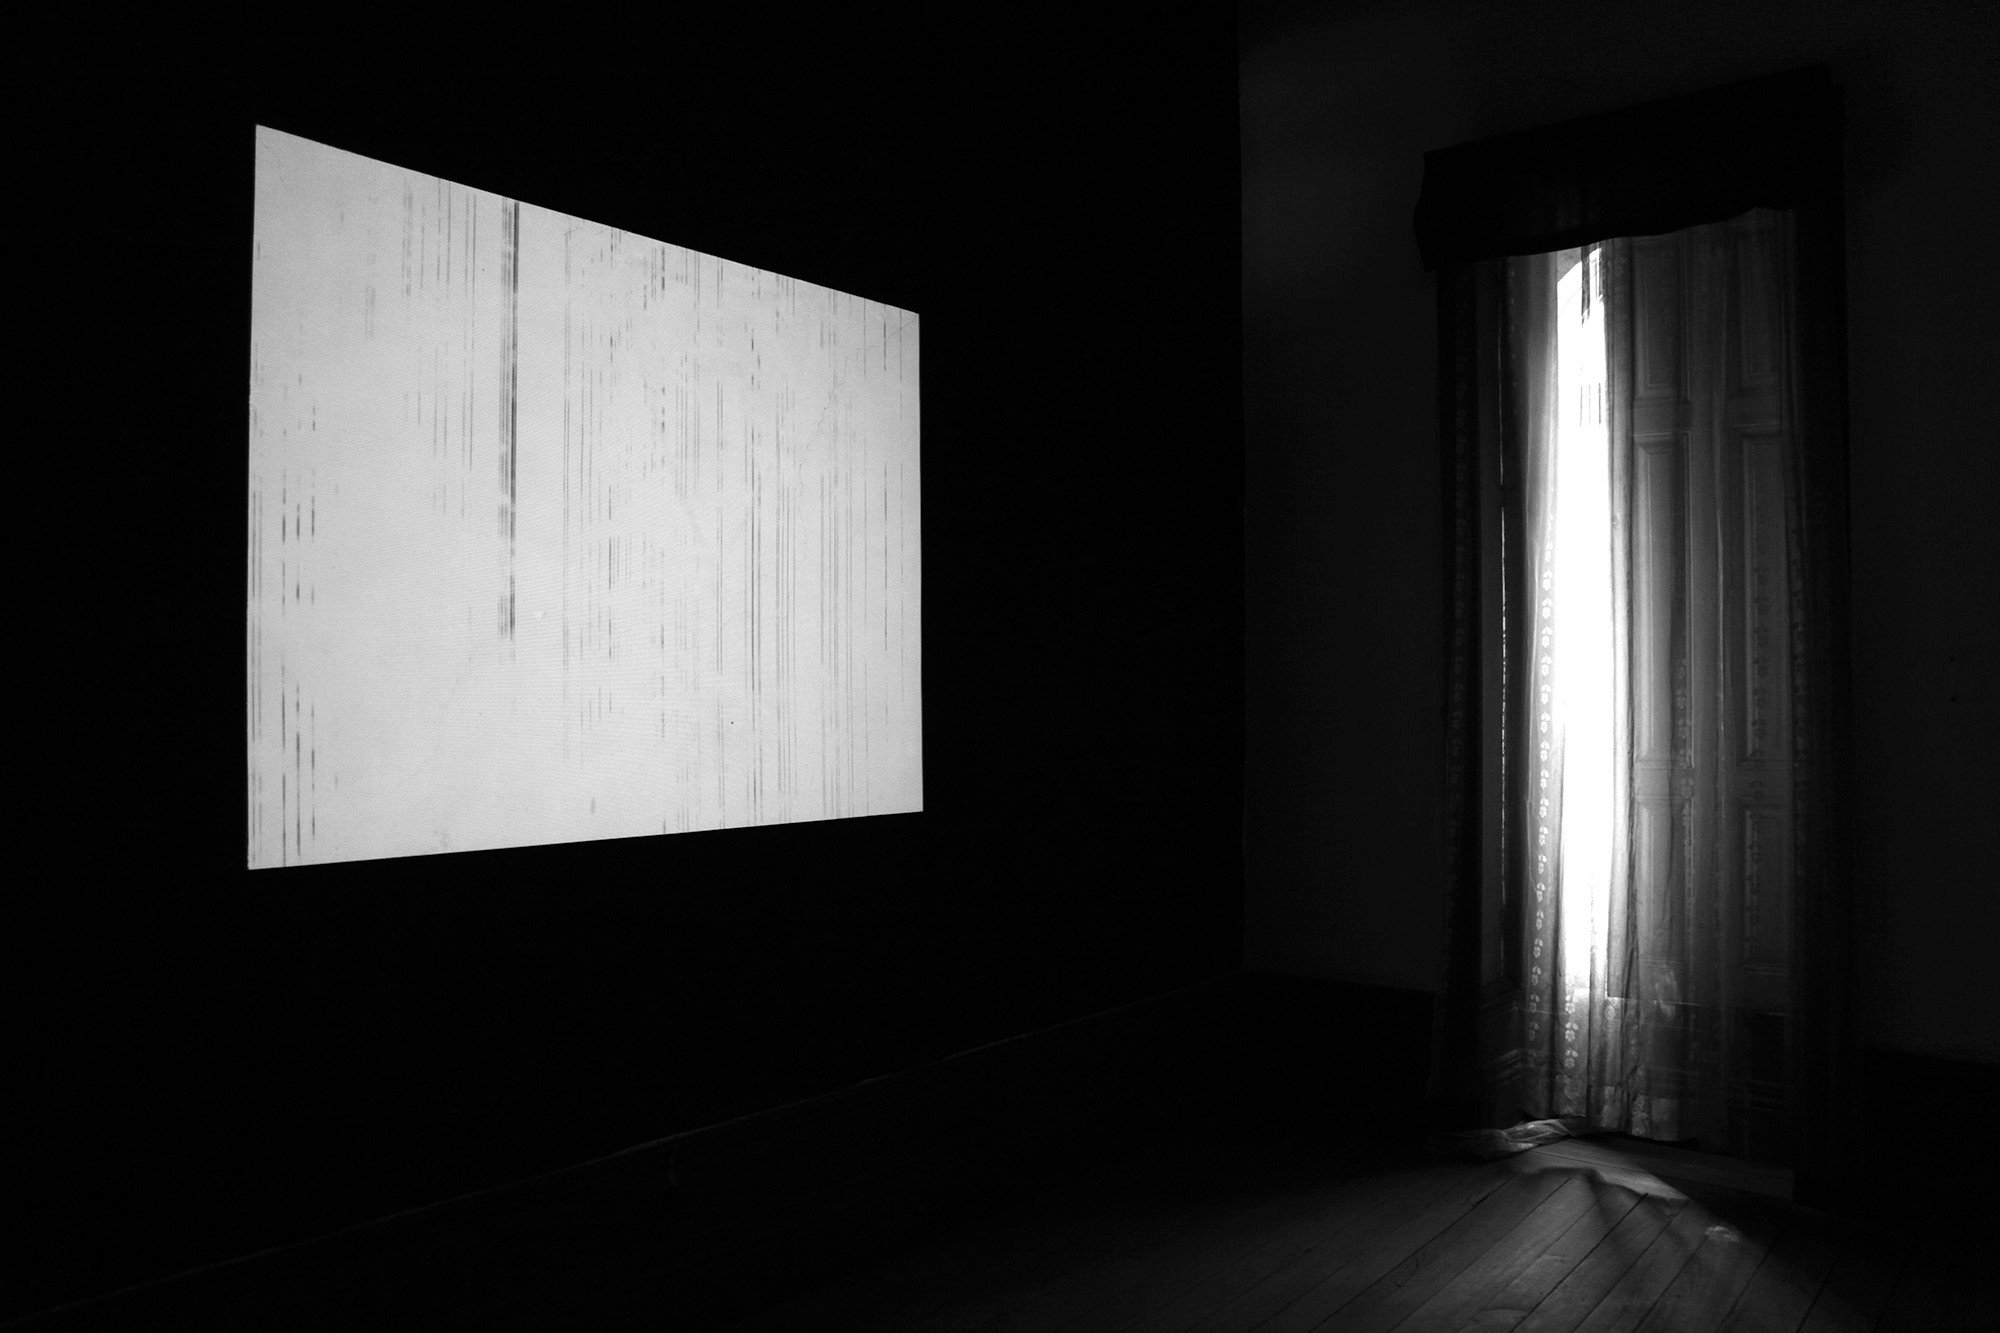 Carina Martins - asyncho - audiovisual projection in a black wall with window